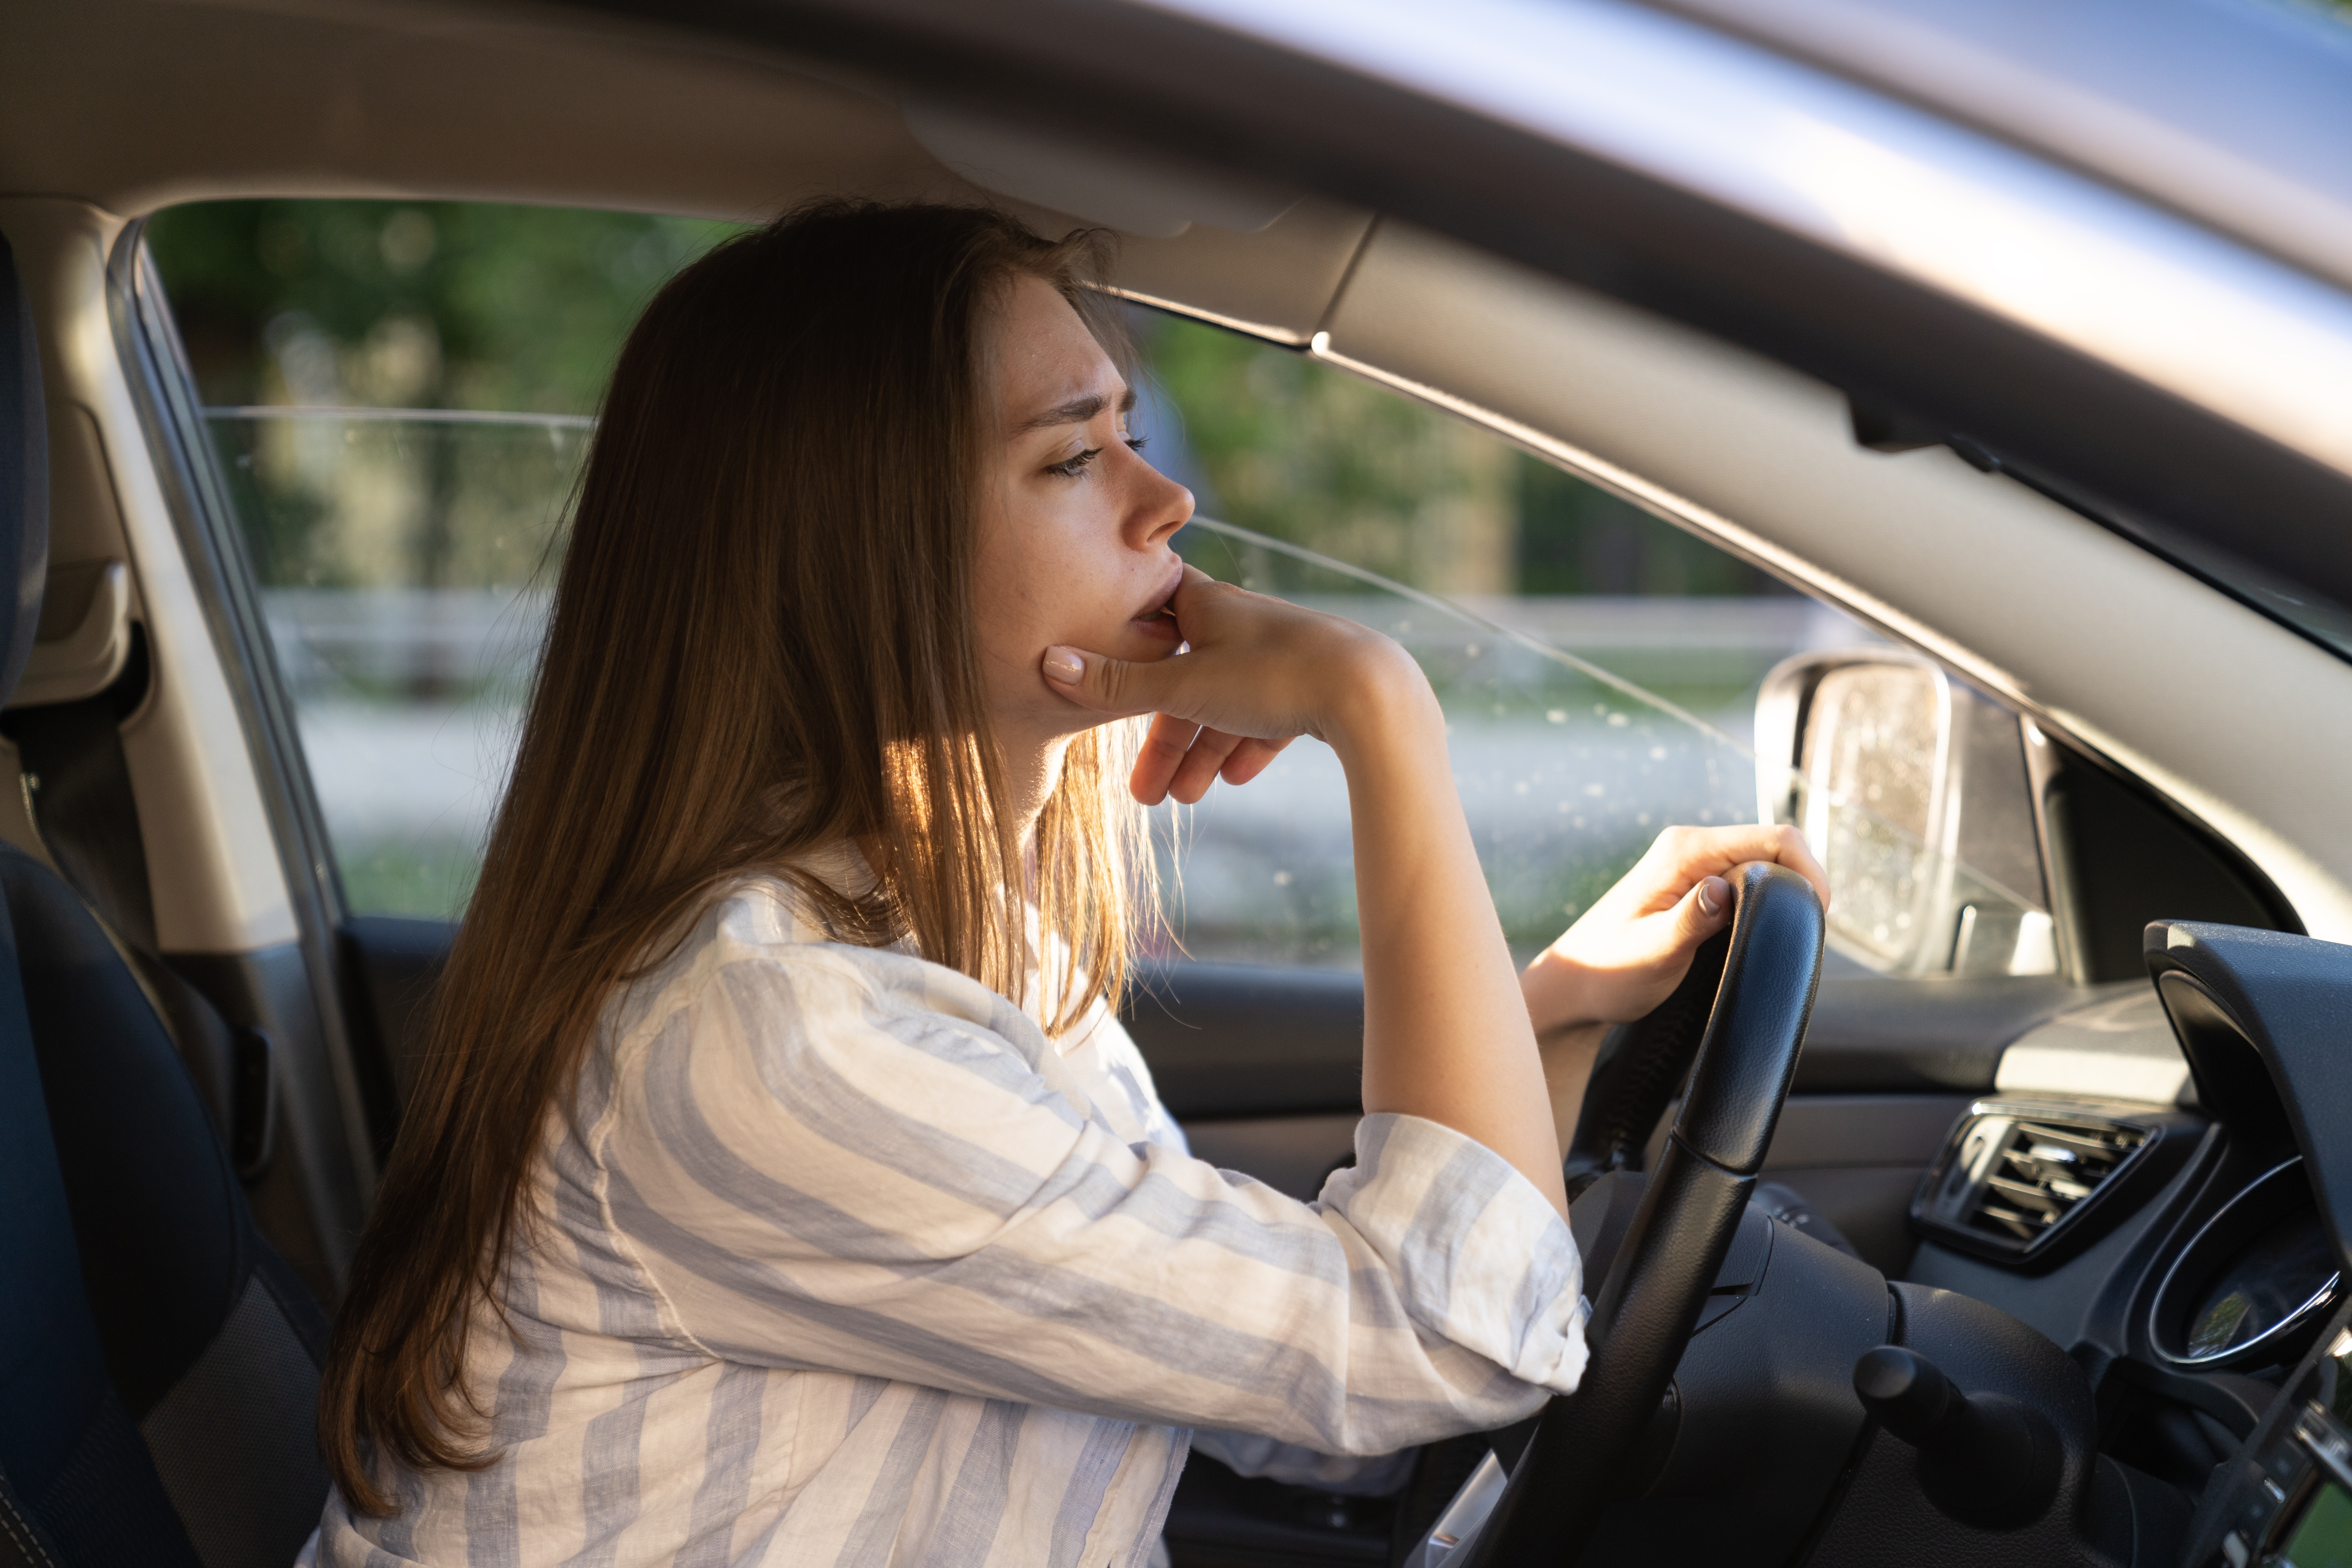 A woman thinking while driving a car | Source: Shutterstock